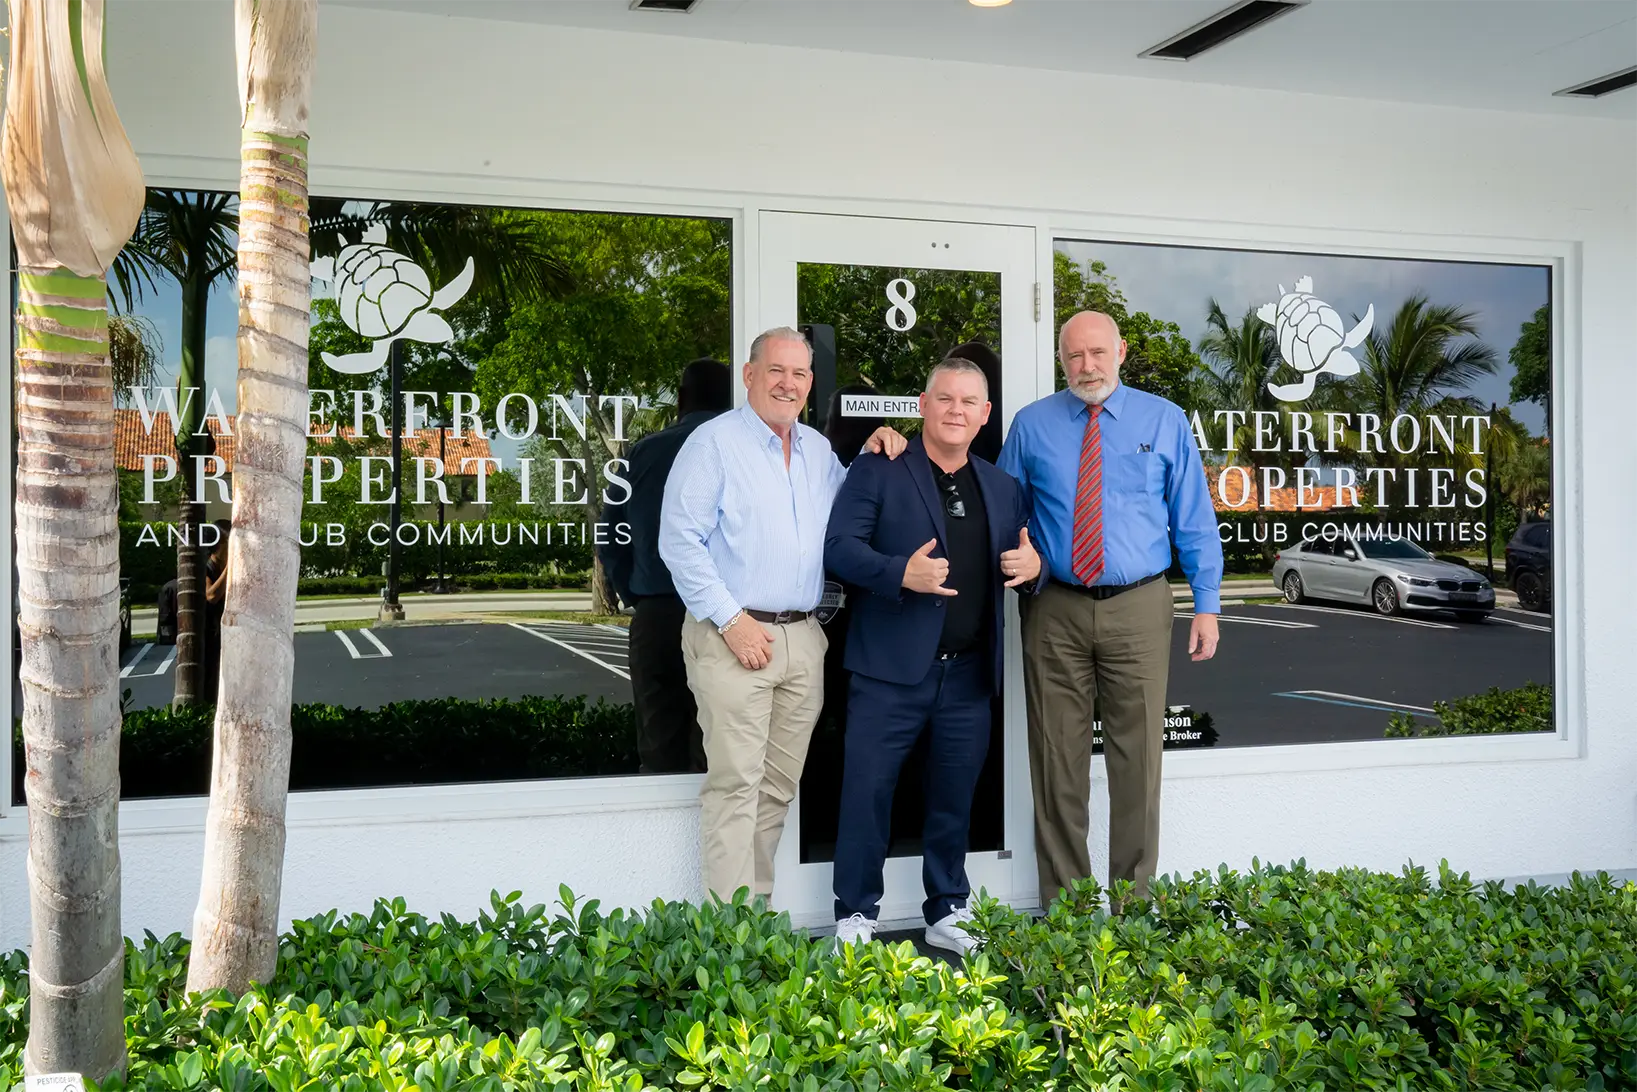 Image of Rob Thomson (left) and David Abernathy (right) of Waterfront Properties and Club Communities and Morgan Carey, CEO of Real Estate Webmasters (middle)